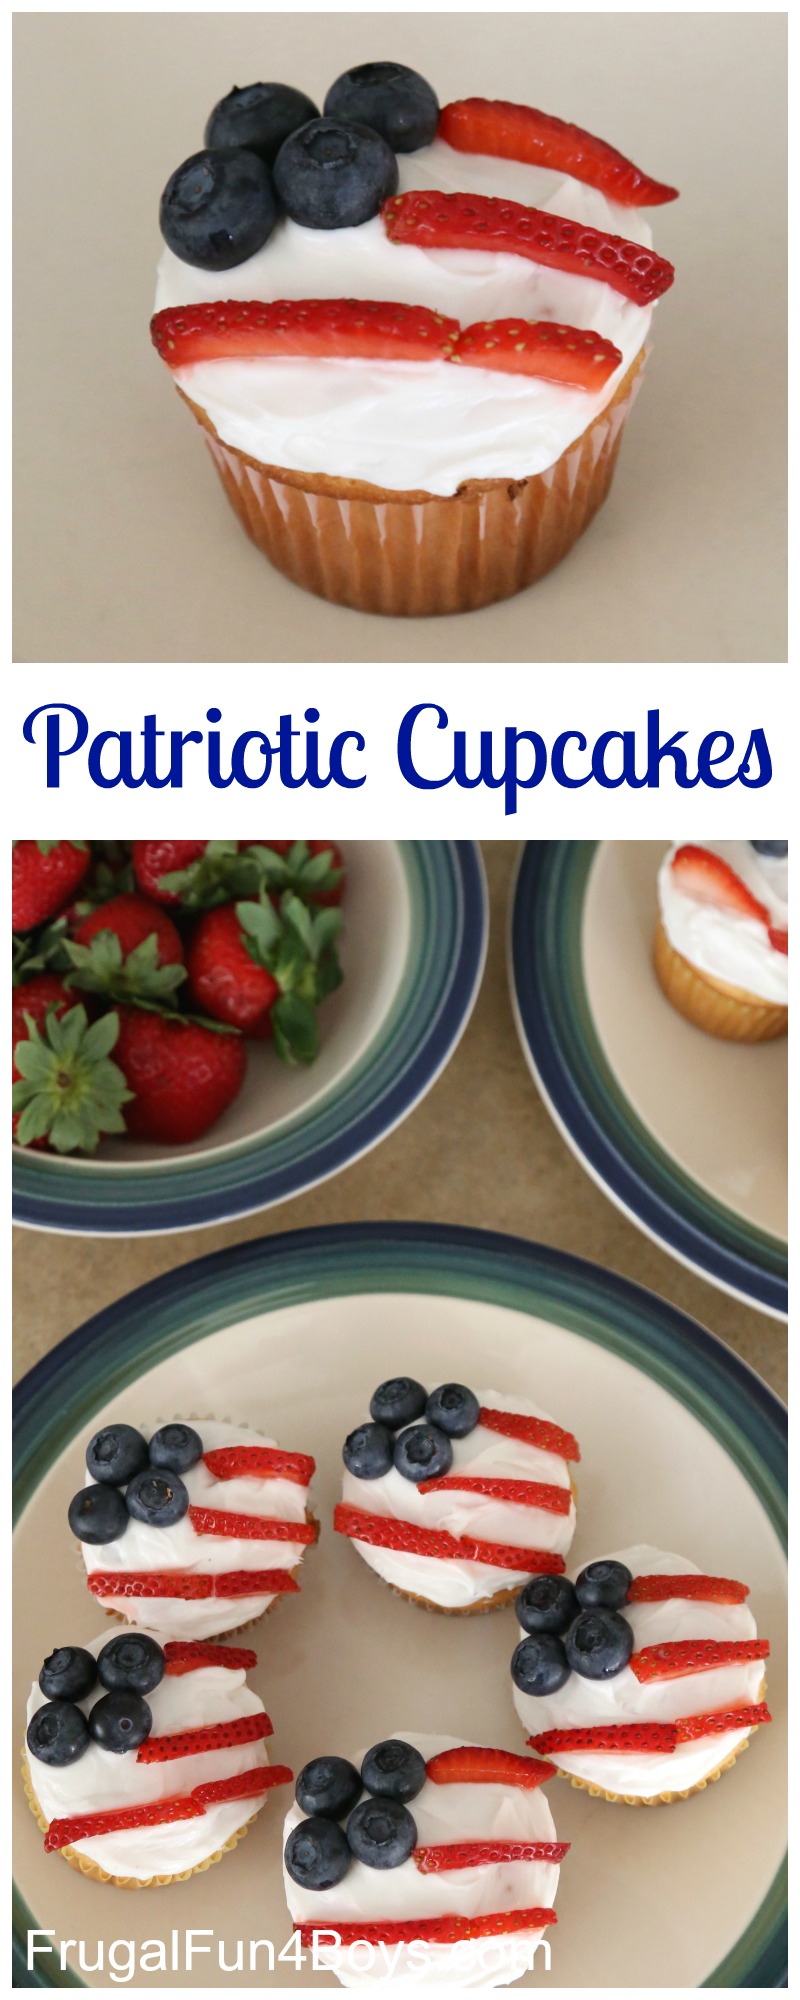 Patriotic Flag Cupcakes for the 4th of July